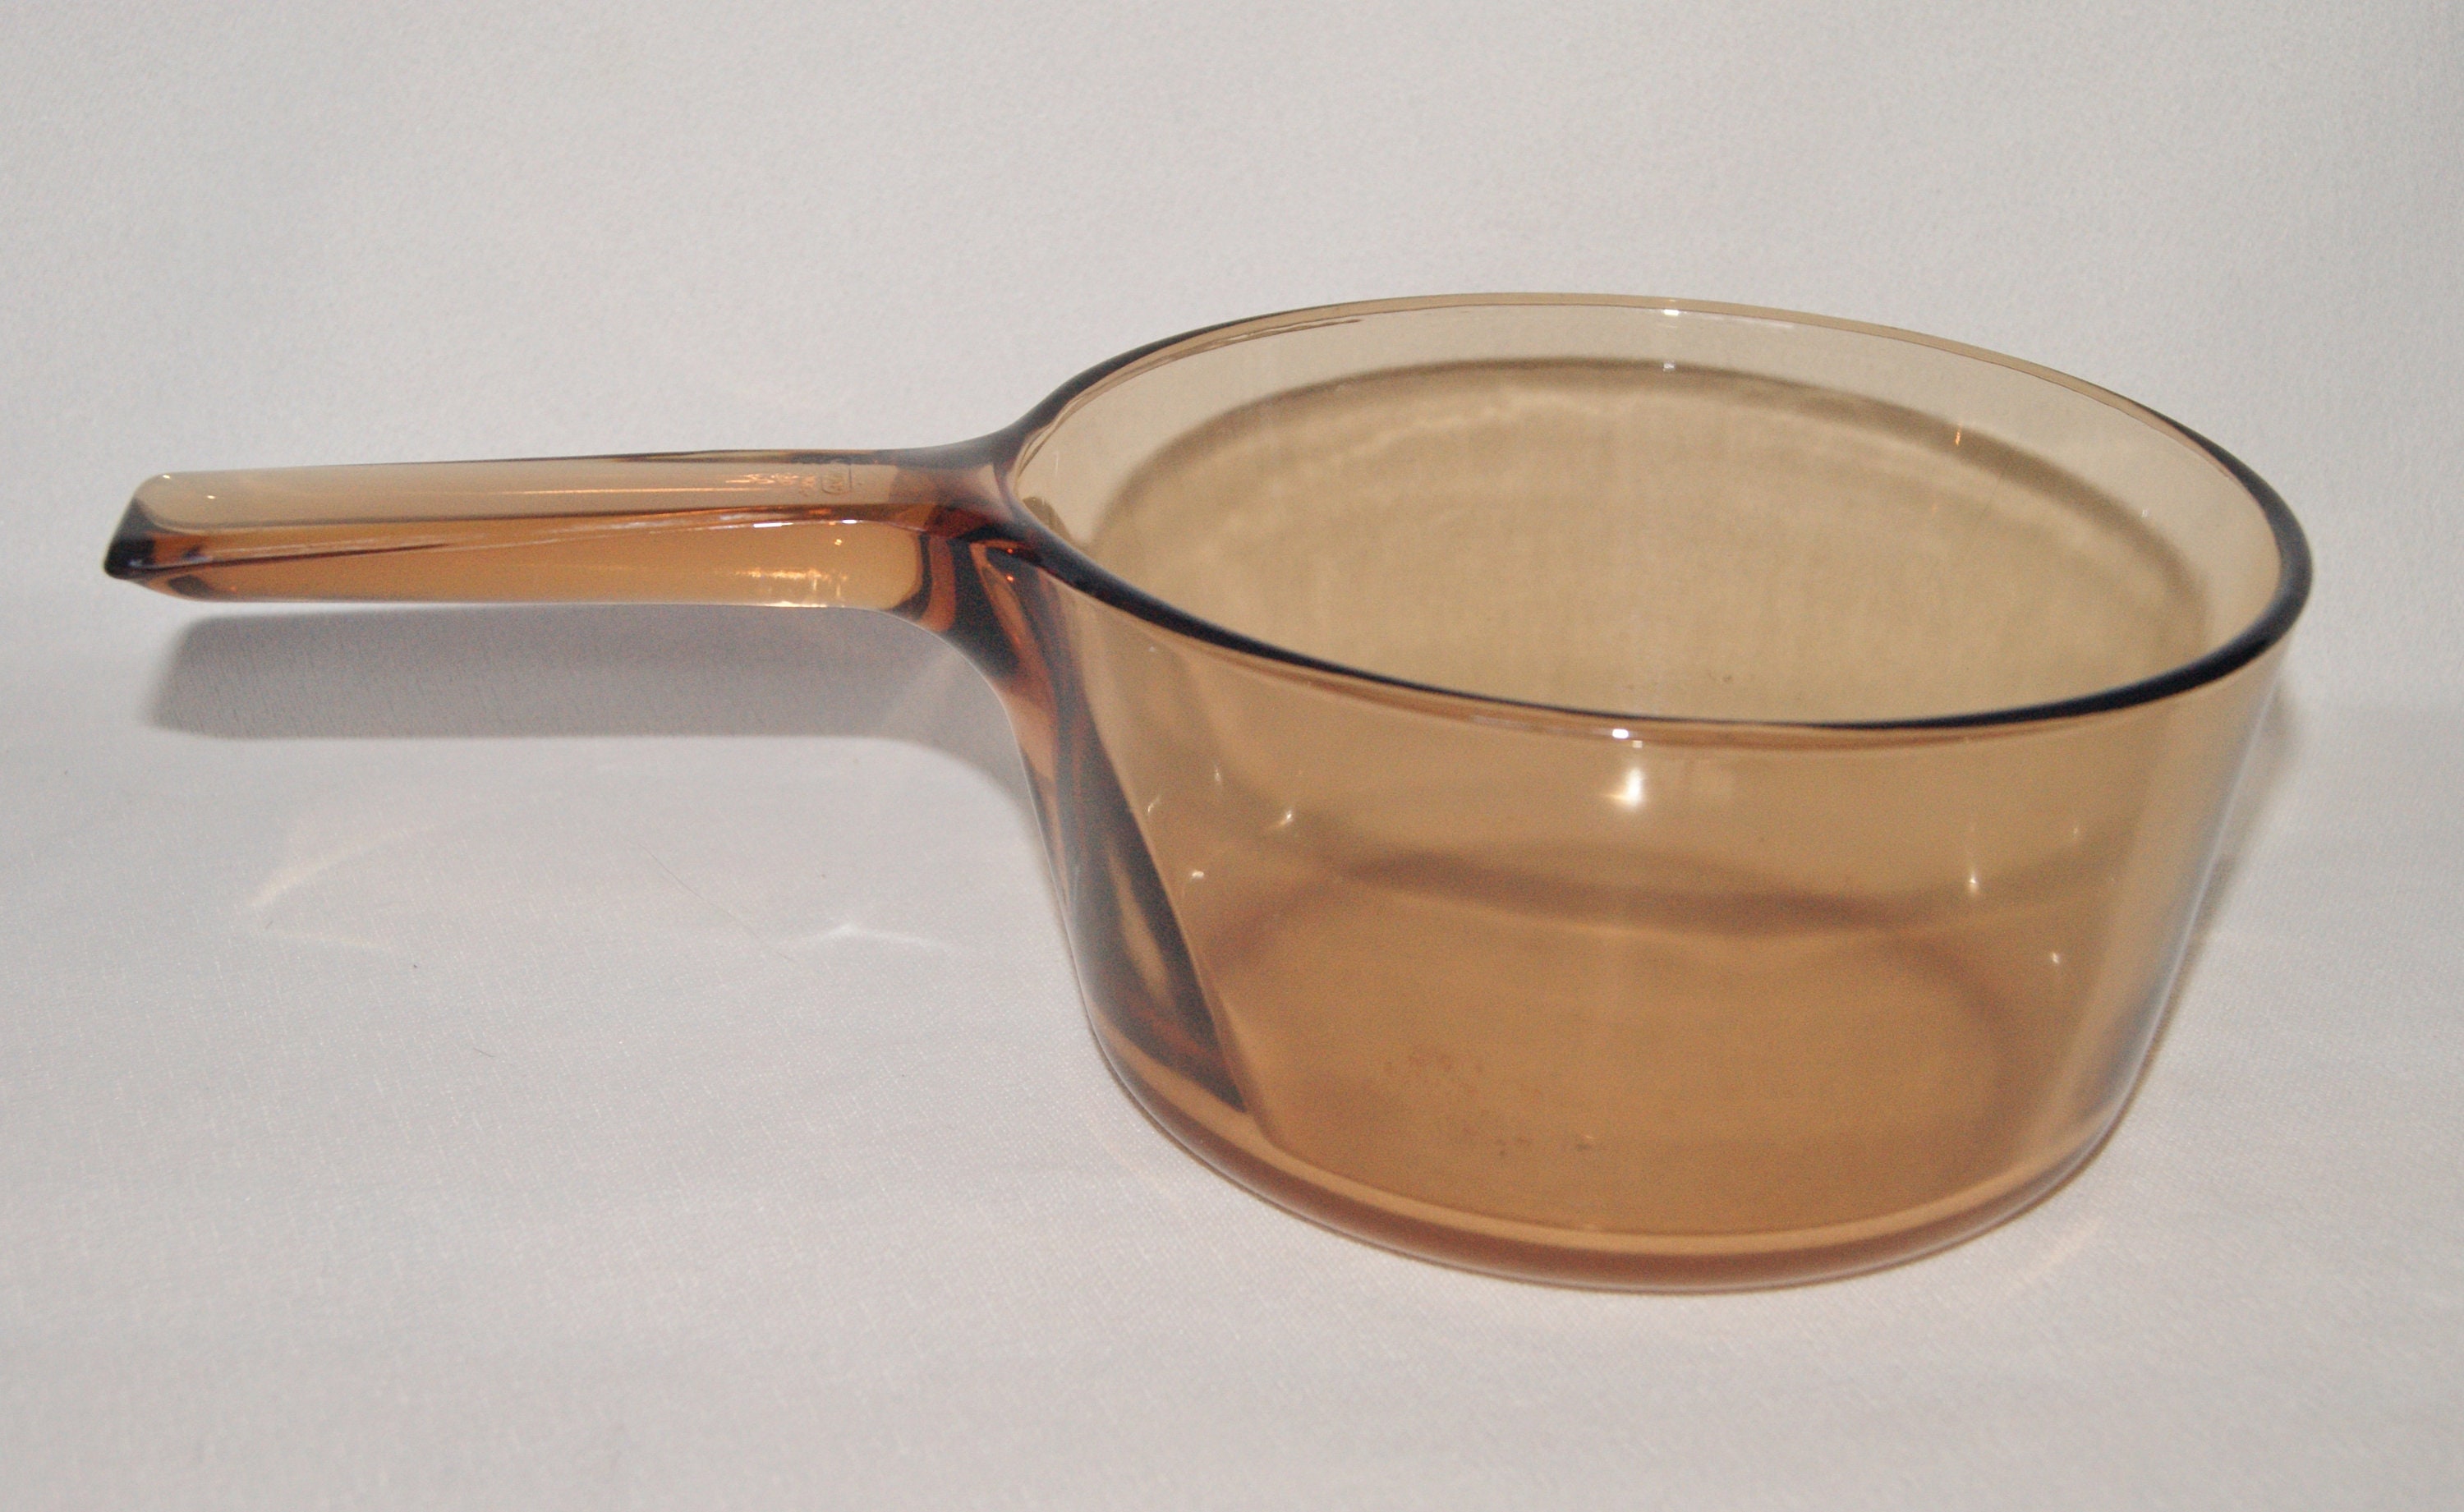 2L Pumpkin Pattern Clear Glass Cooking Pots With Lid And Dual Handles